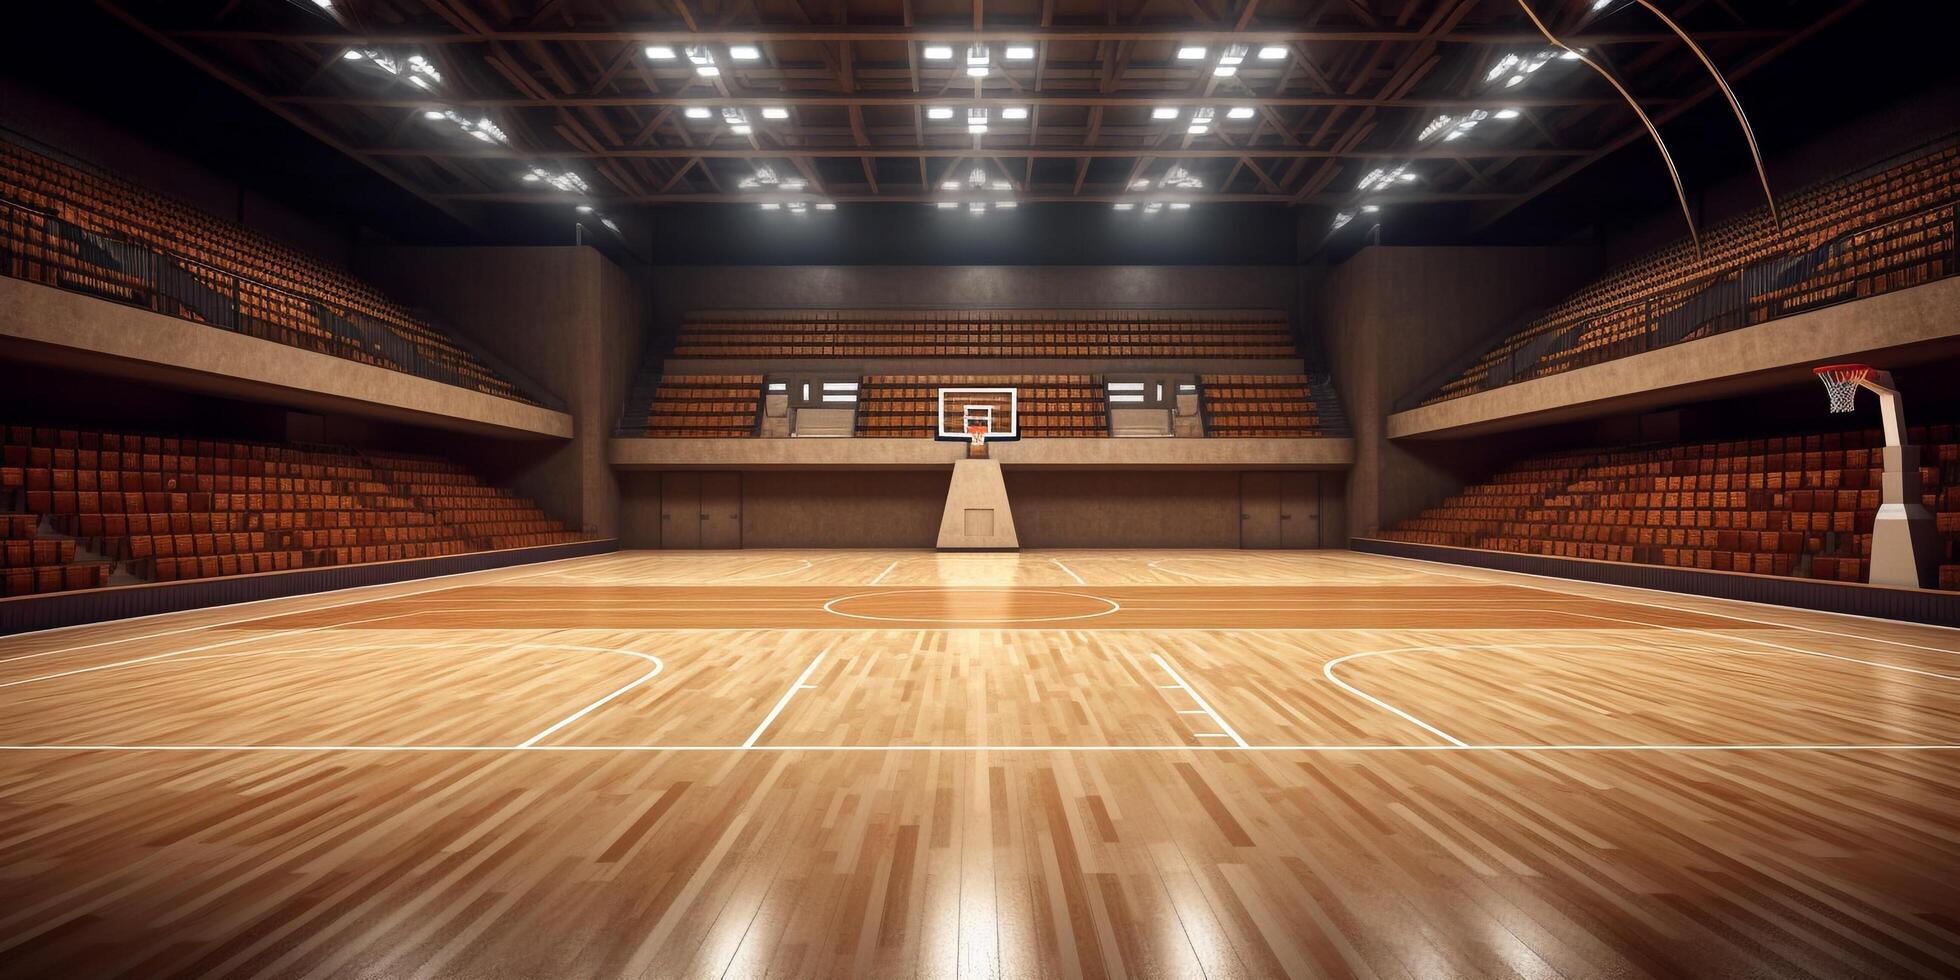 Stadium basketball court with wood floor and bleachers with . photo